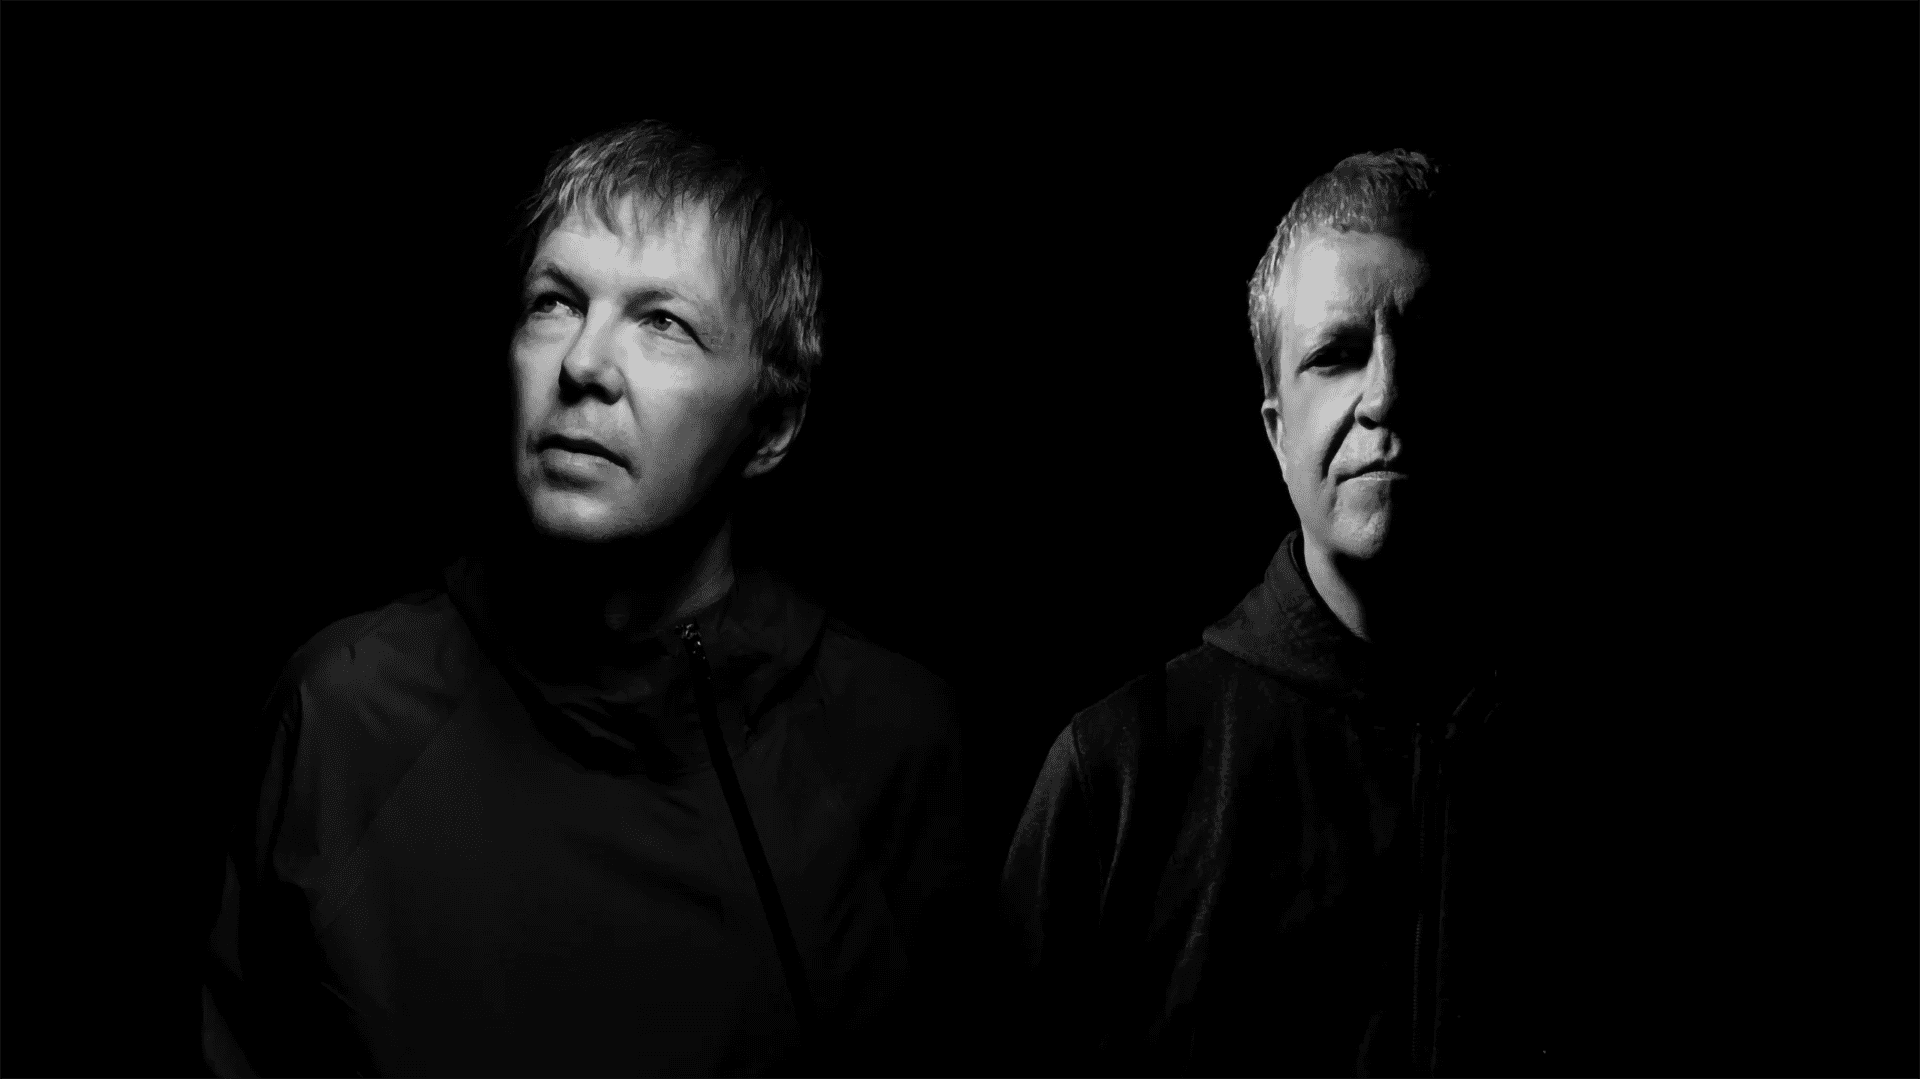 John Digweed & Nick Muir team up once more to deliver two fascinating remixes